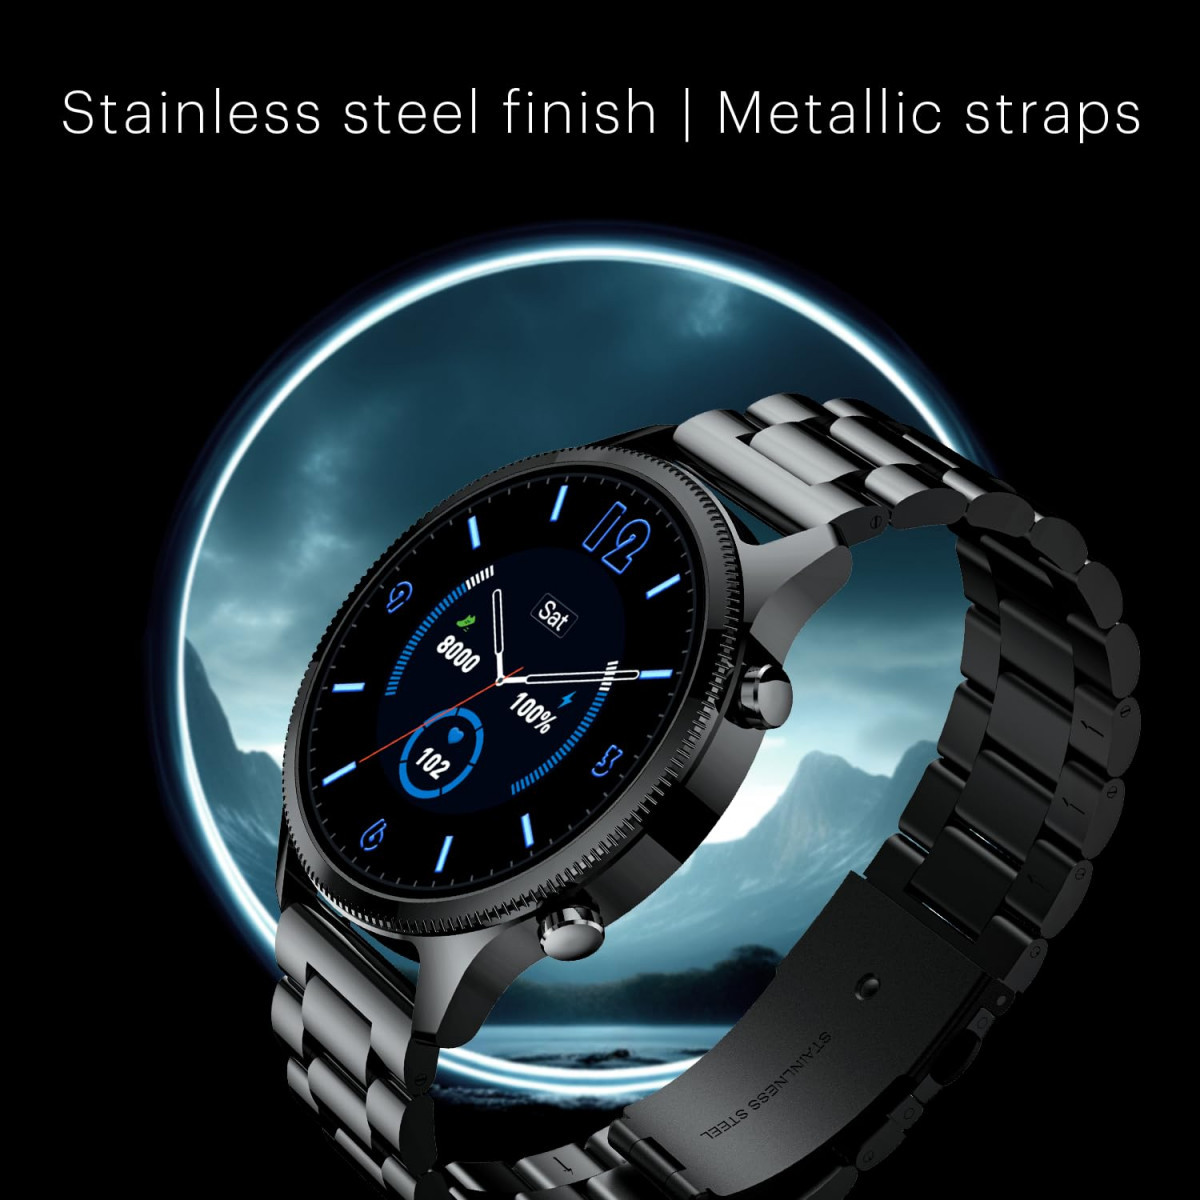 Noise Halo Plus 146 Super AMOLED Display Elite Smart Watch Bluetooth Calling Stainless Steel Build